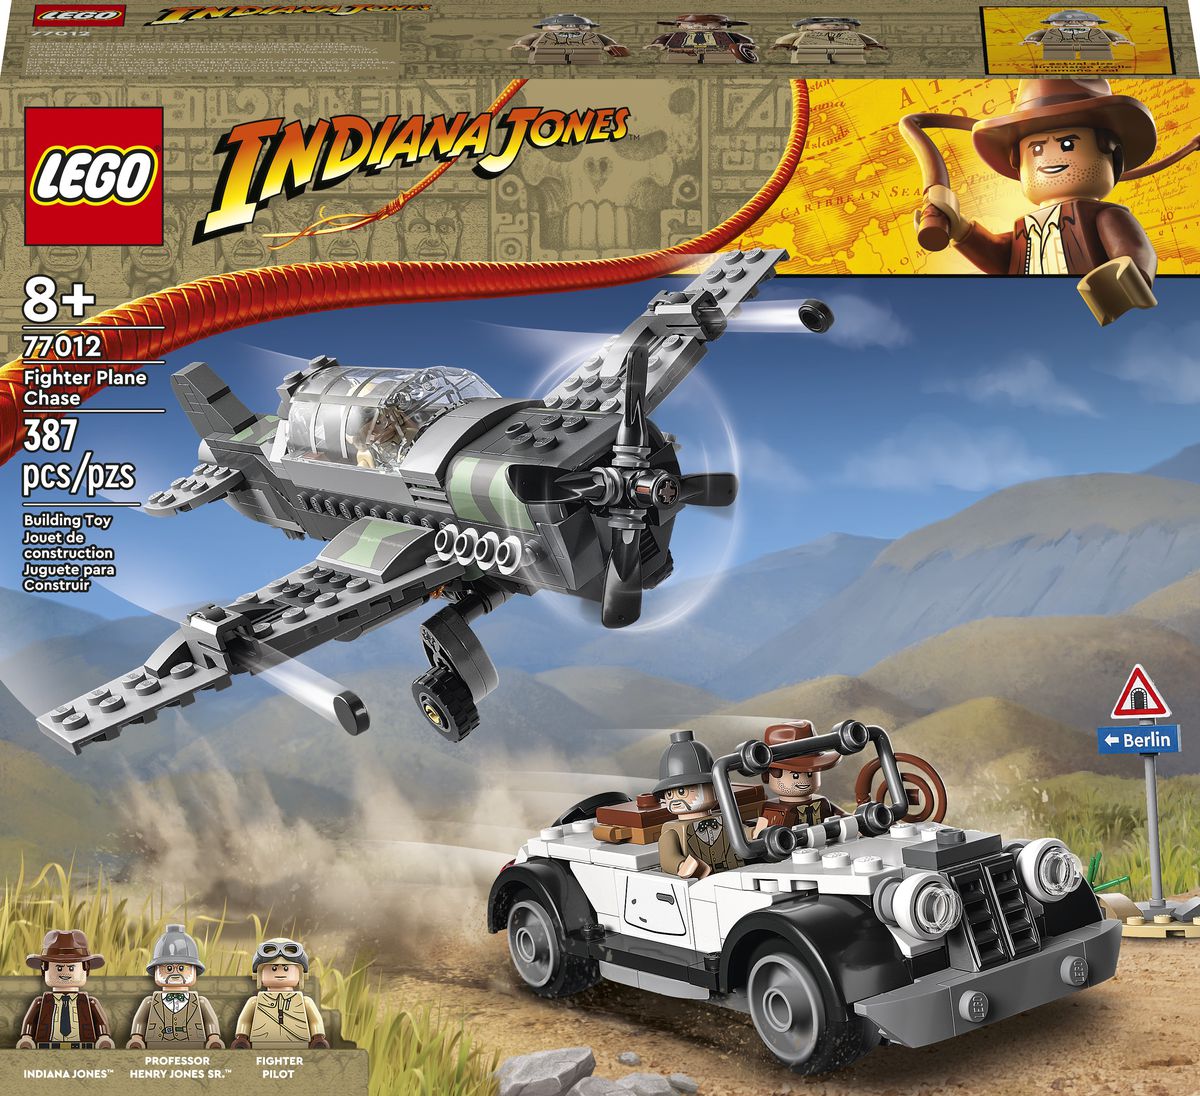 Fighter Plane Chase LEGo box cover